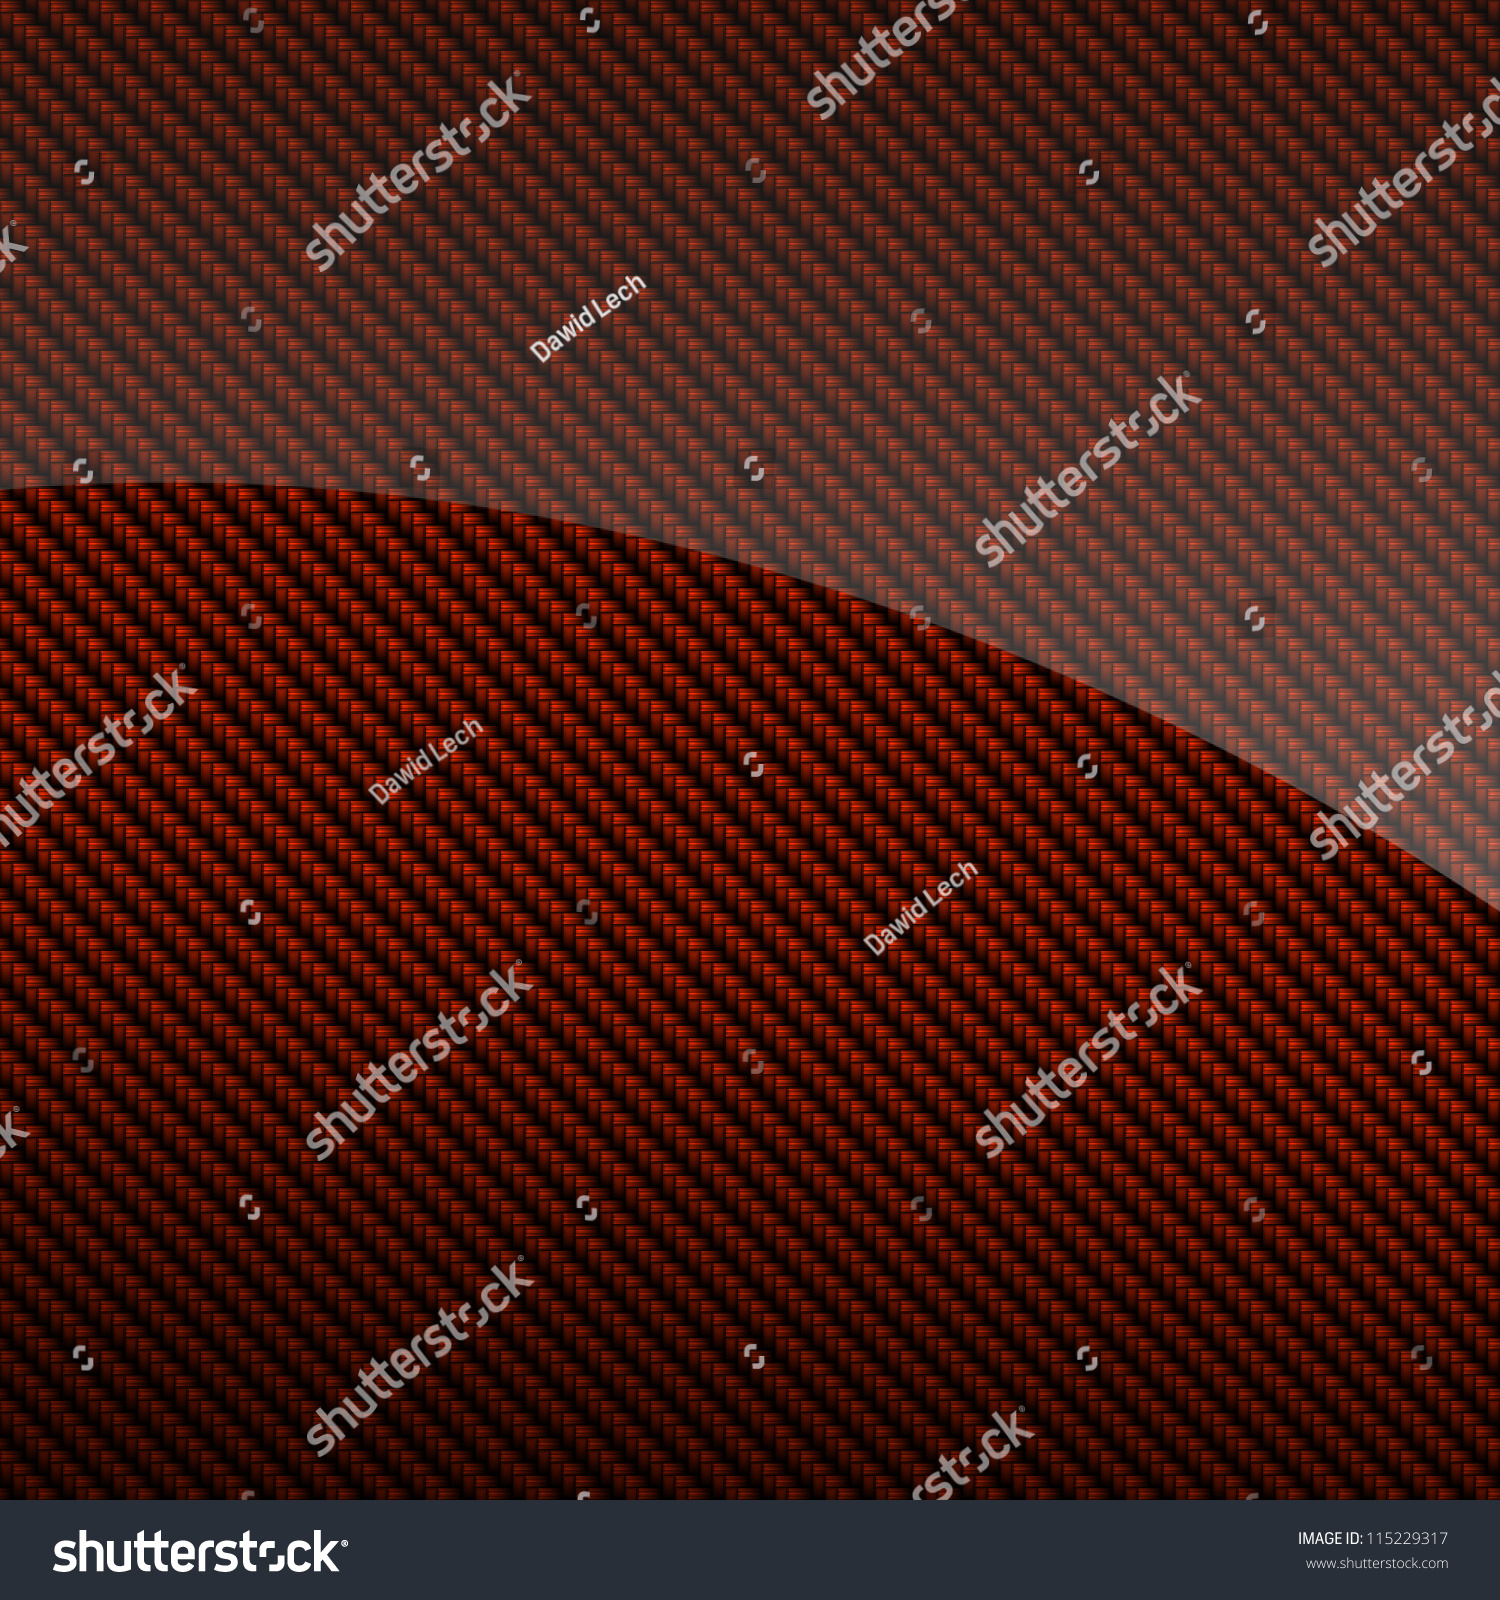 Red Glossy Carbon Fiber Background Or Texture Stock Photo 115229317 ...